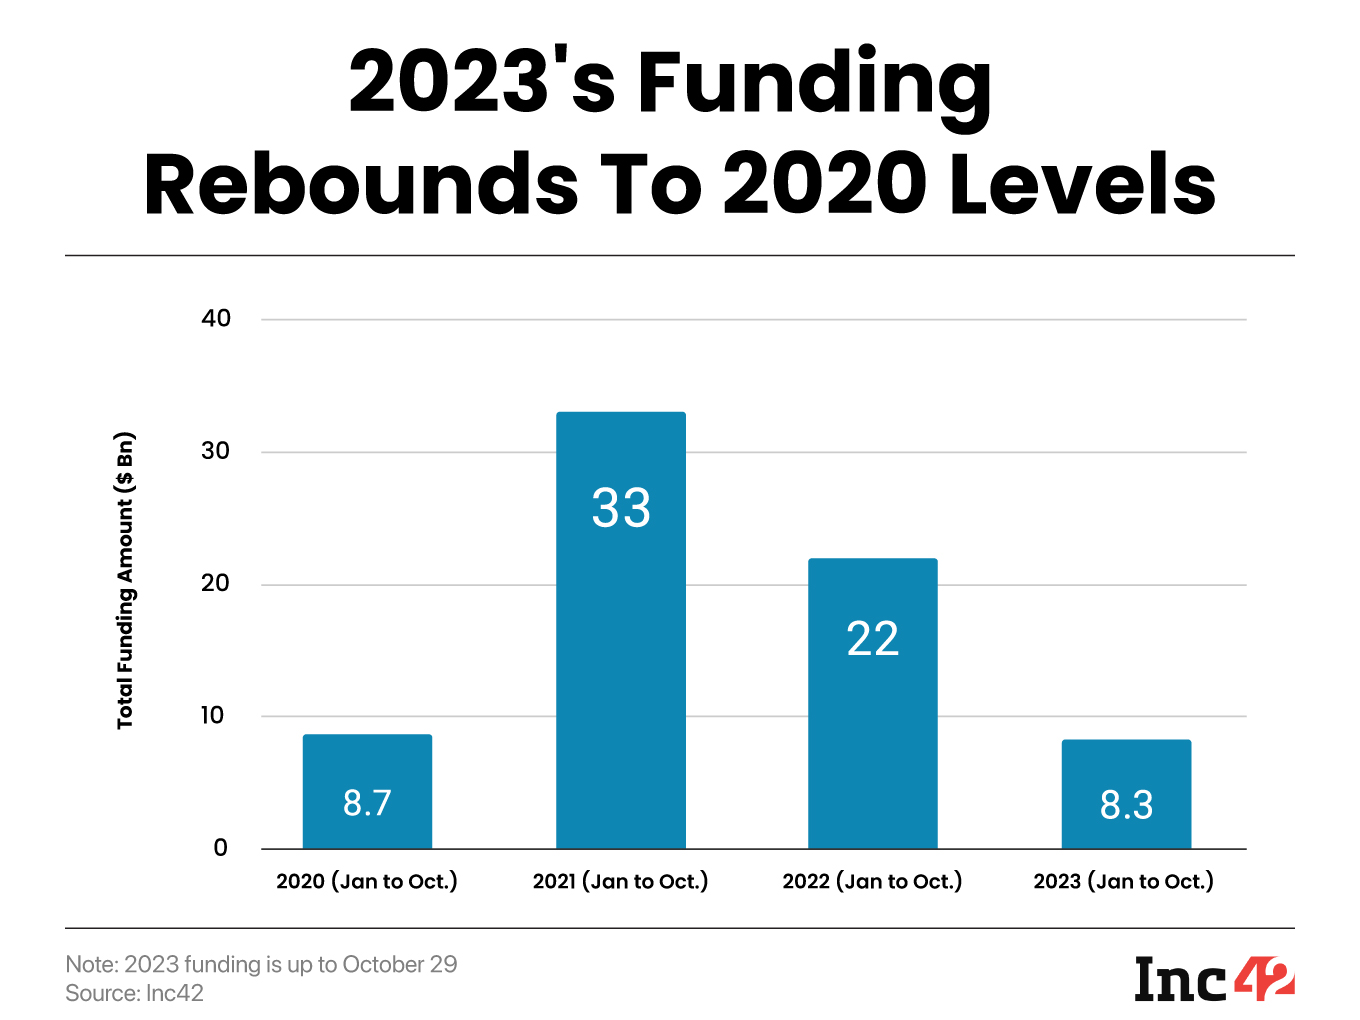 Indian Startup Funding Rebounds To 2020 Levels, $8.3 Bn Raised In 2023 So Far